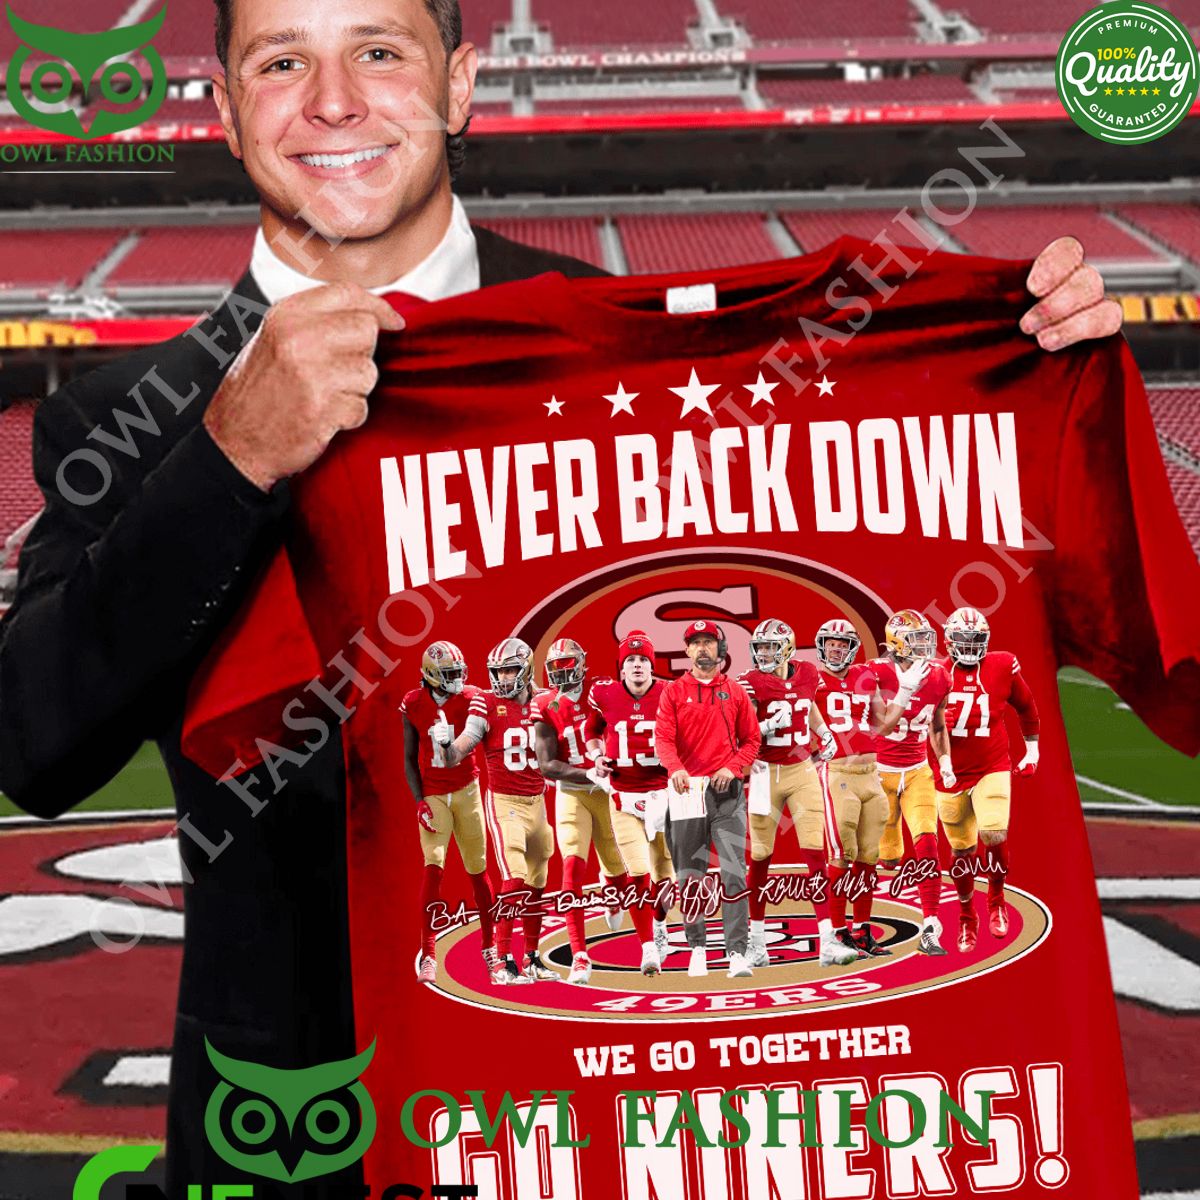 Never back down San Francisco 49ers Go together go niners win or lose t shirt